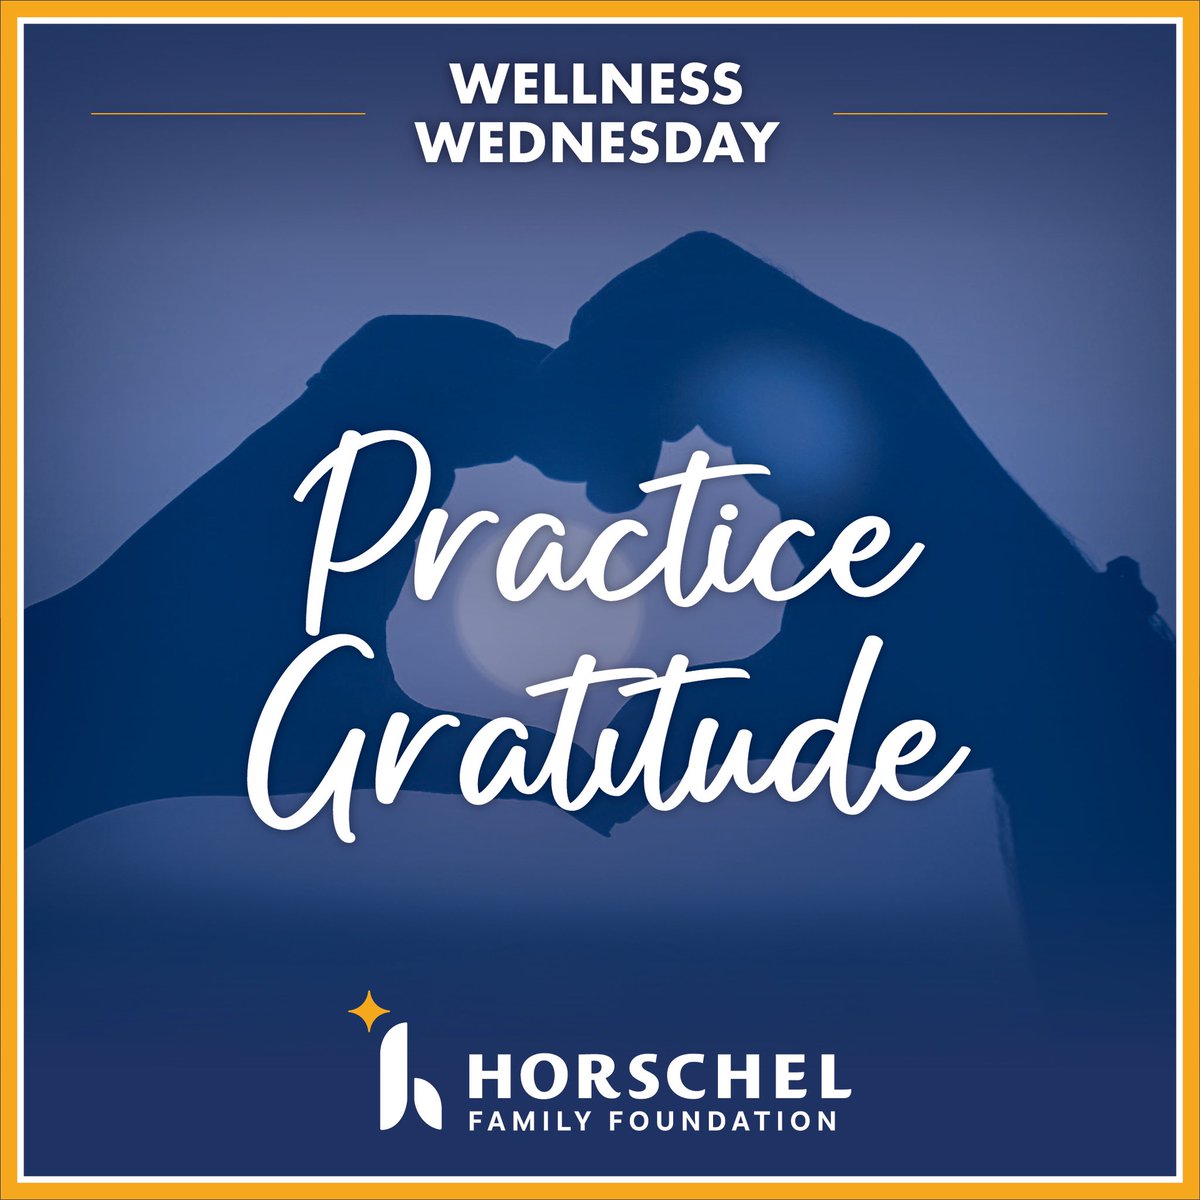 Our final Wellness Wednesday is focused on #Gratitude! Gratitude: the quality of being thankful; readiness to show appreciation for and to return kindness. Today, we express our sincere #gratitude to those who have helped make the Horschel Family Foundation a reality. Thank you